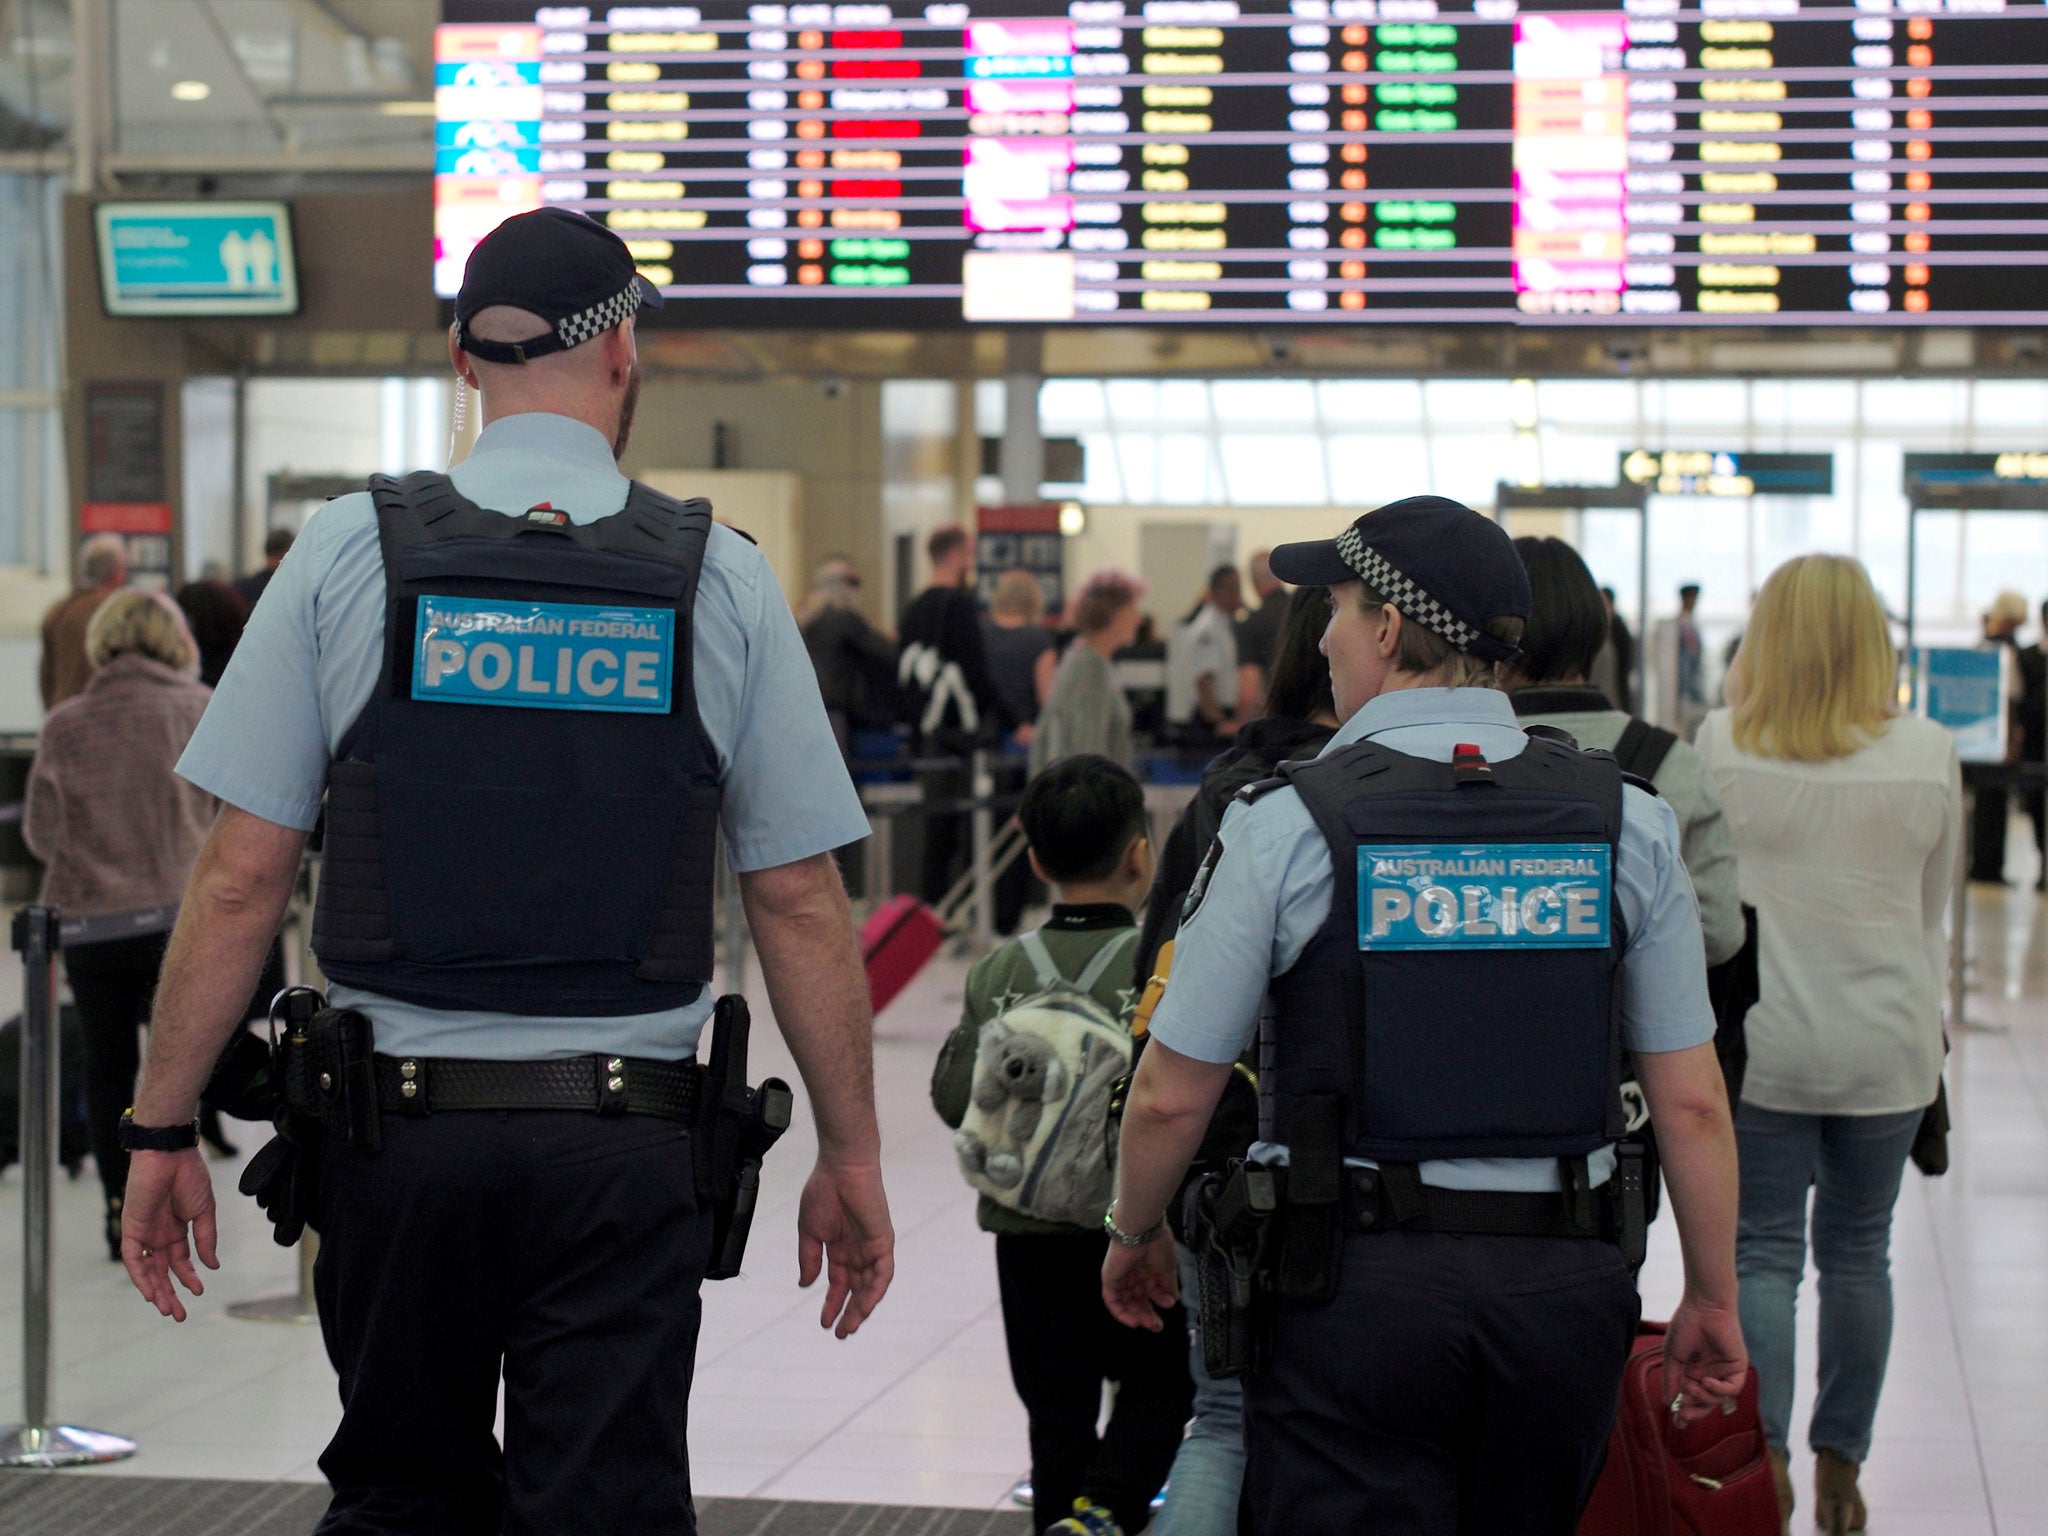 Australia Federal Police officers patrol the security lines at Sydney's Domestic Airport